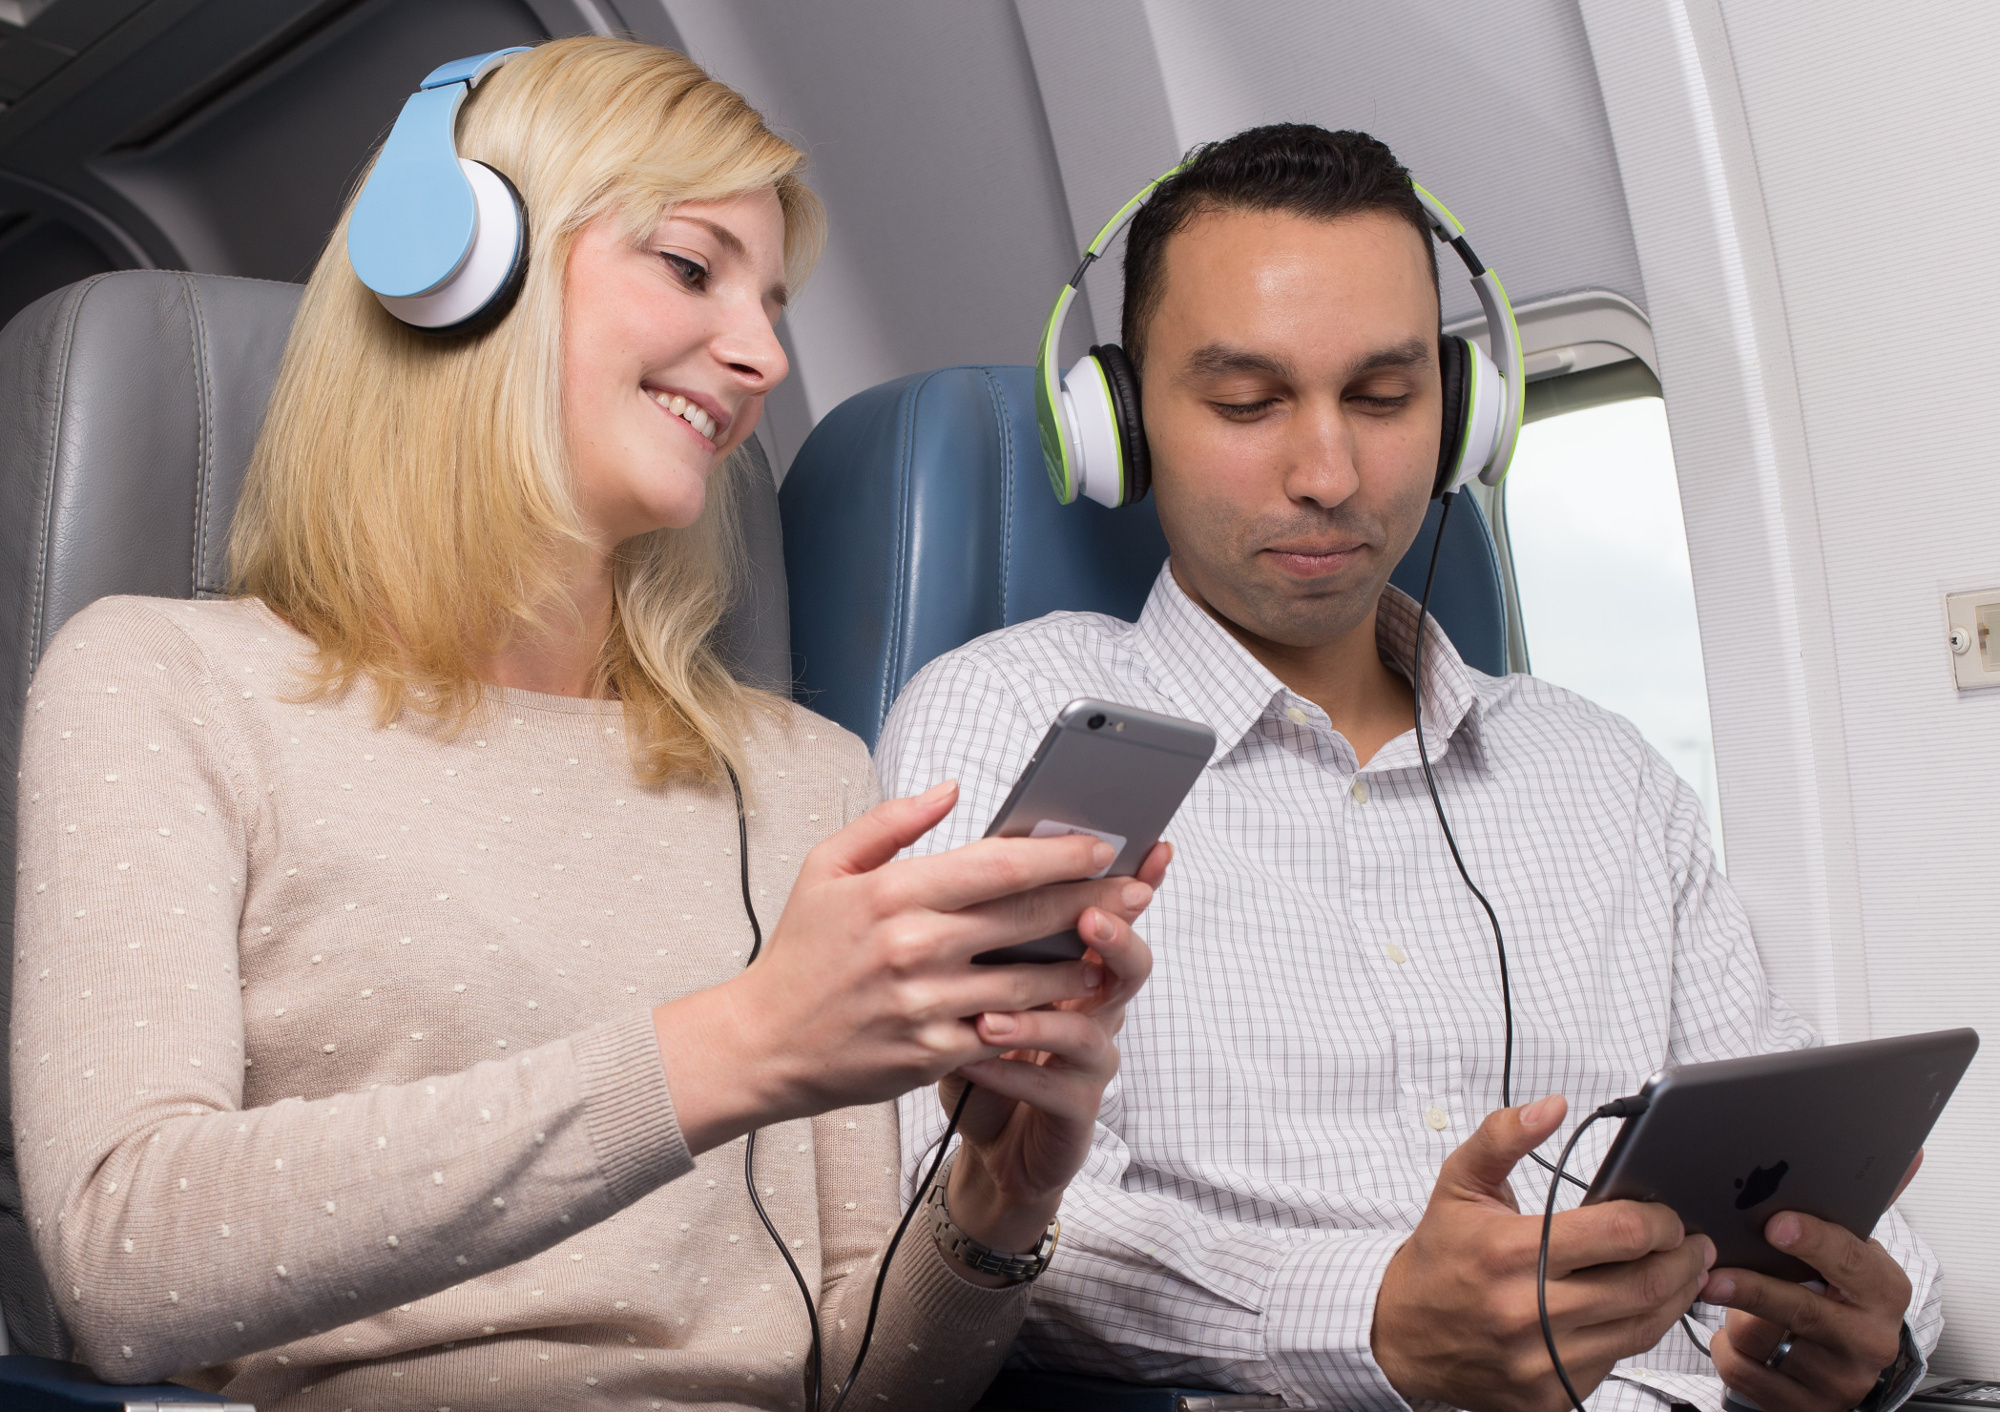 Lufthansa Systems' BoardConnect enables passengers to enjoy a broad range of entertainment on their own smartphones and tablets.